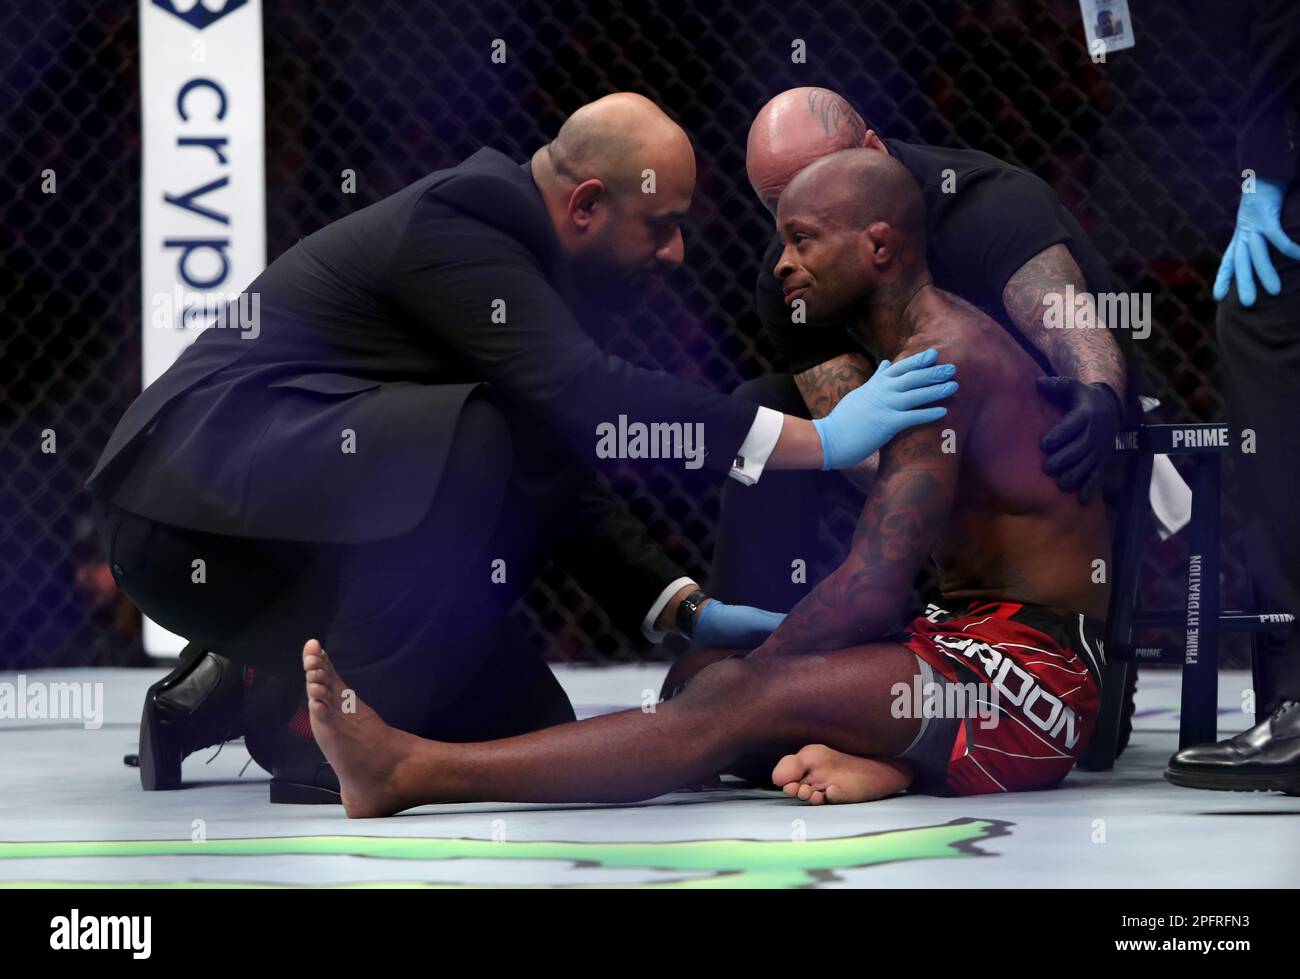 Canada's Malcolm Gordon (centre) is seen to by officials after the referee ended his Men's Flyweight bout against United Kingdom's Jake Hadley during UFC 286 at 02 Arena, London Picture date: Saturday March 18, 2023. Stock Photo